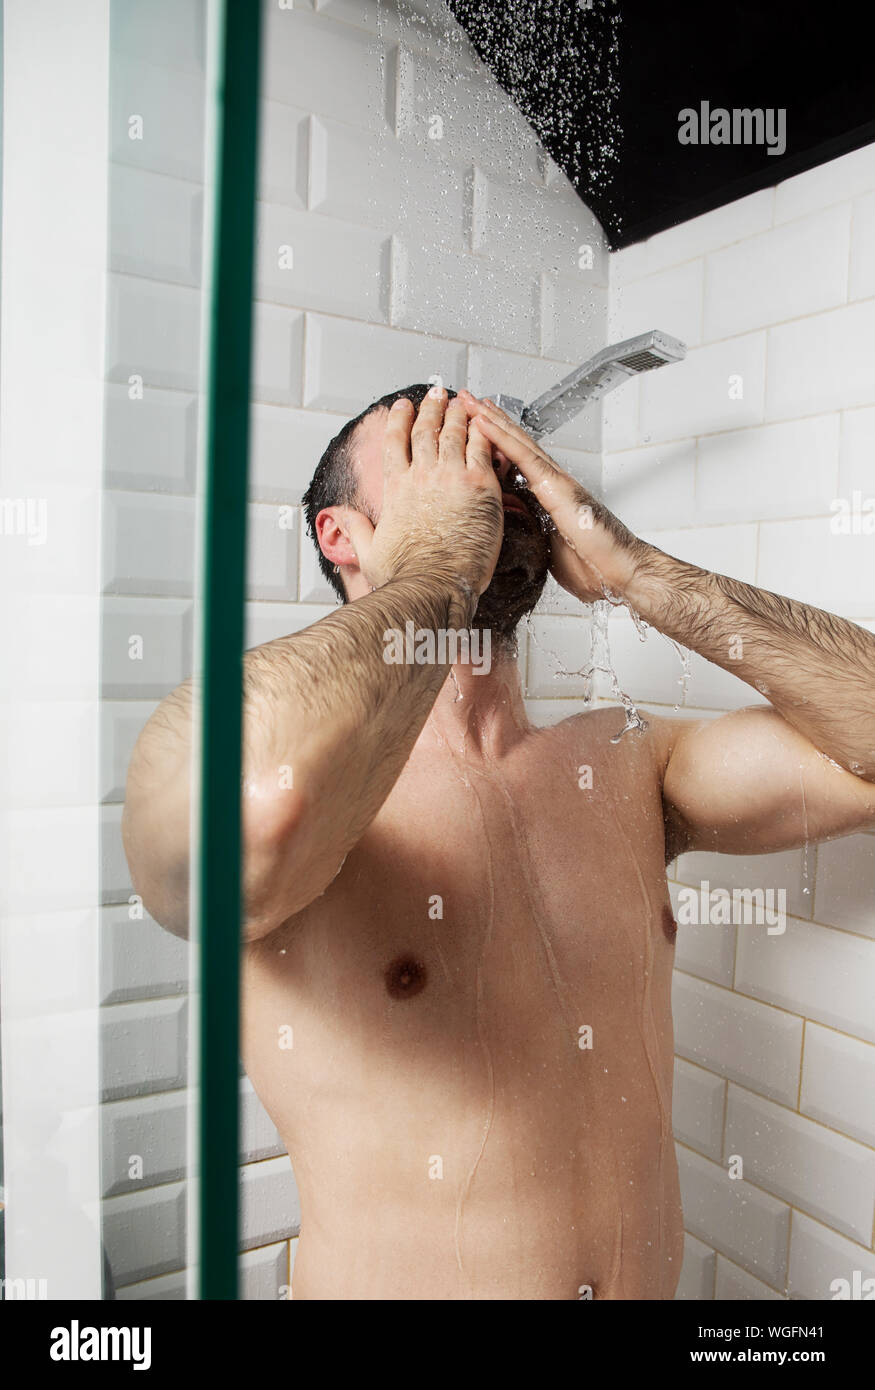 Shirtless Mid Adult Man Taking Shower In Bathroom Stock Photo - Alamy